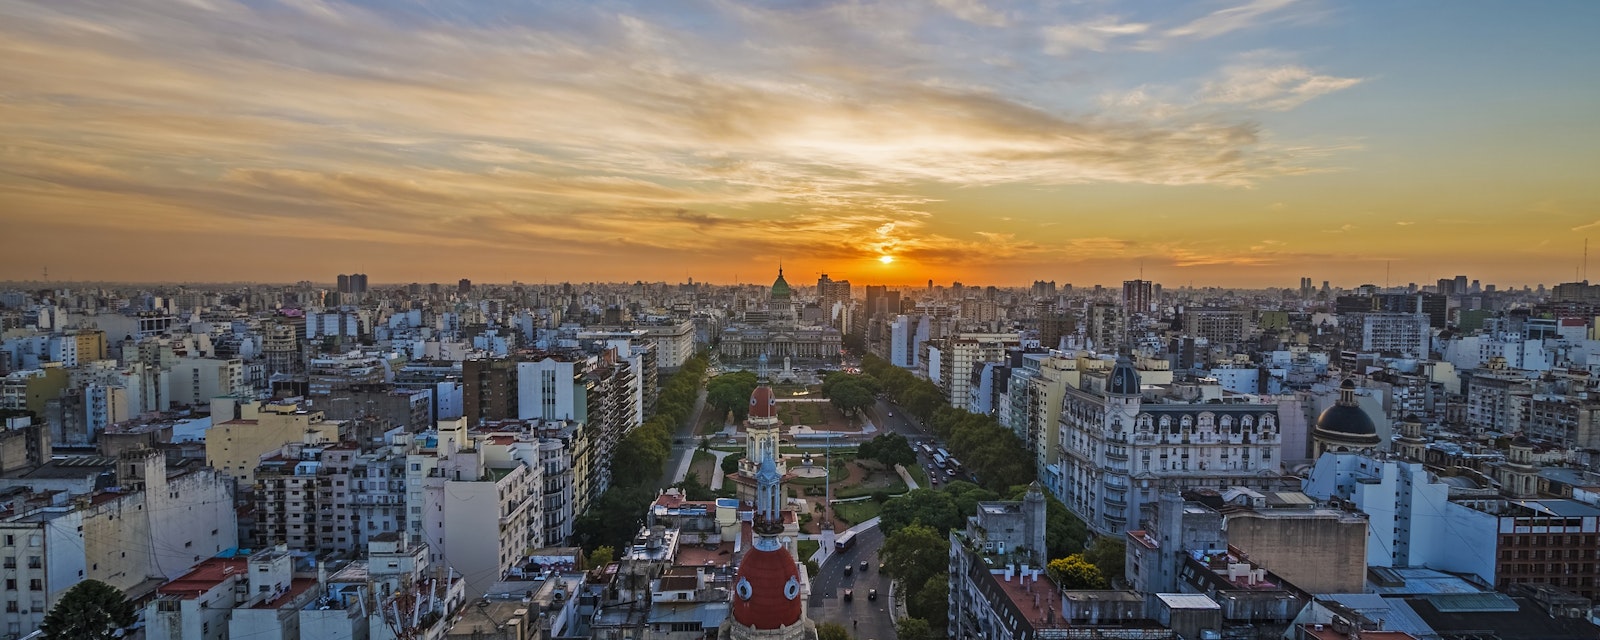 Panoramic,View,Of,Buenos,Aires,At,Dusk